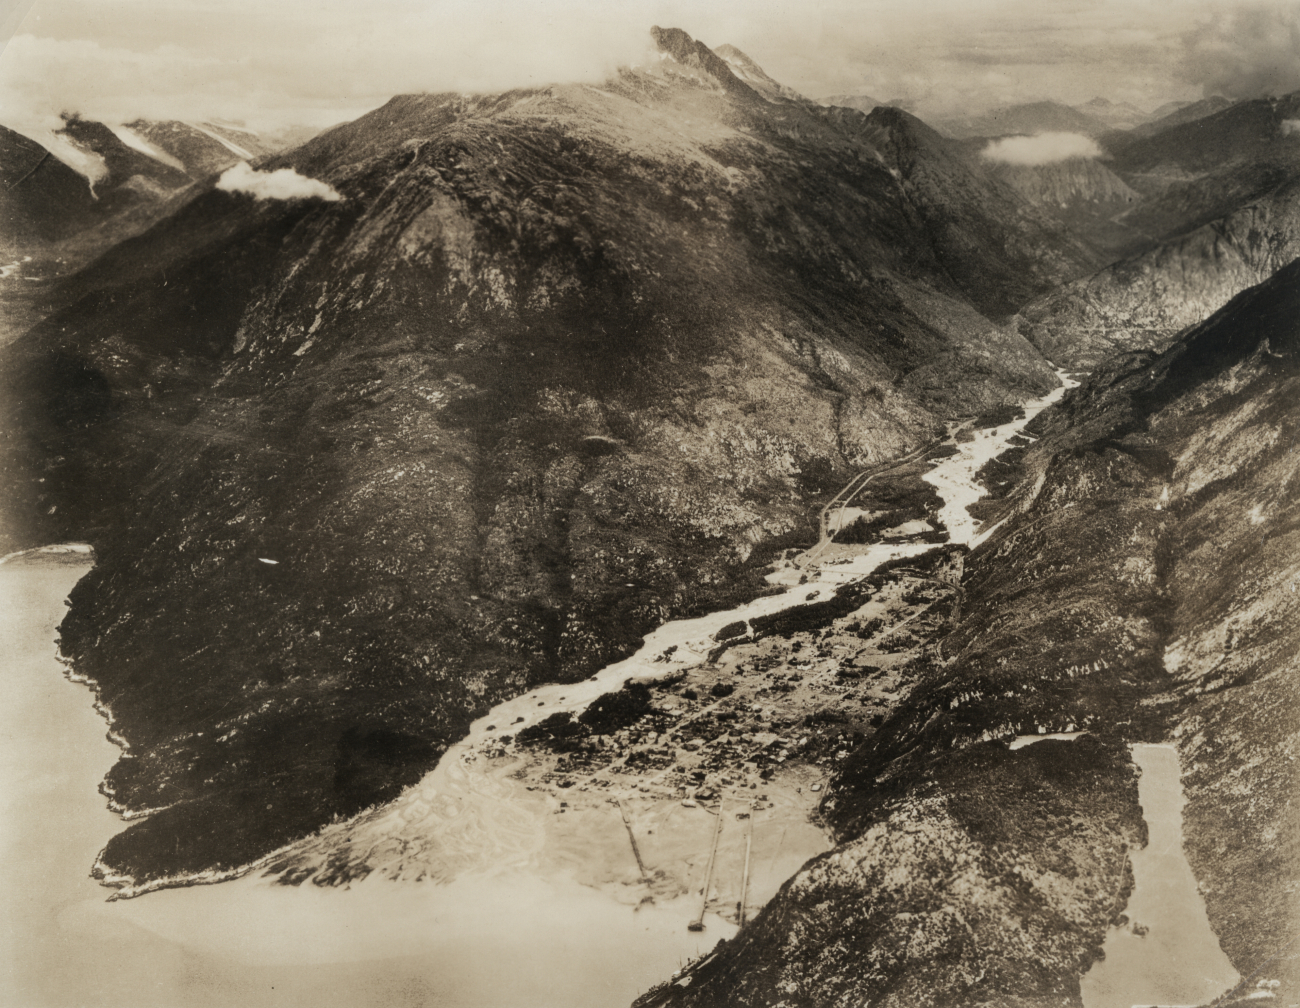 Aerial photograph of Skagway and the Chilkoot Pass area